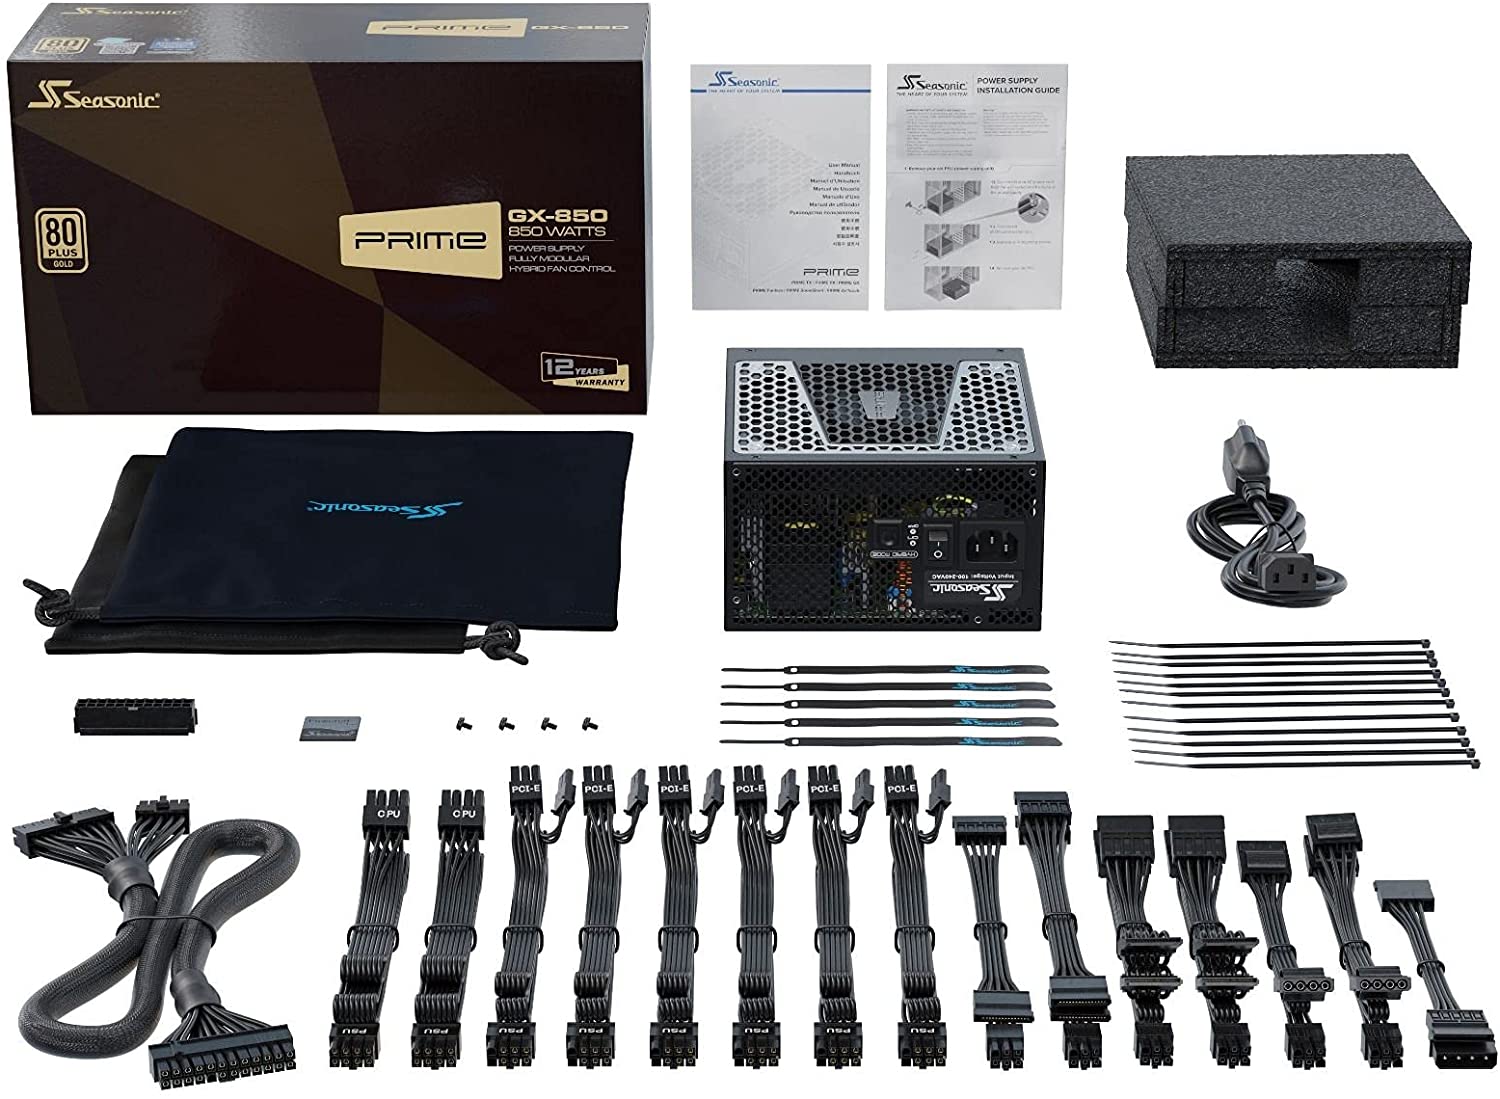 Seasonic PRIME GX-850, 850W 80+ Gold, Full Modular, Fan Control in Fanless, Silent, and Cooling Mode